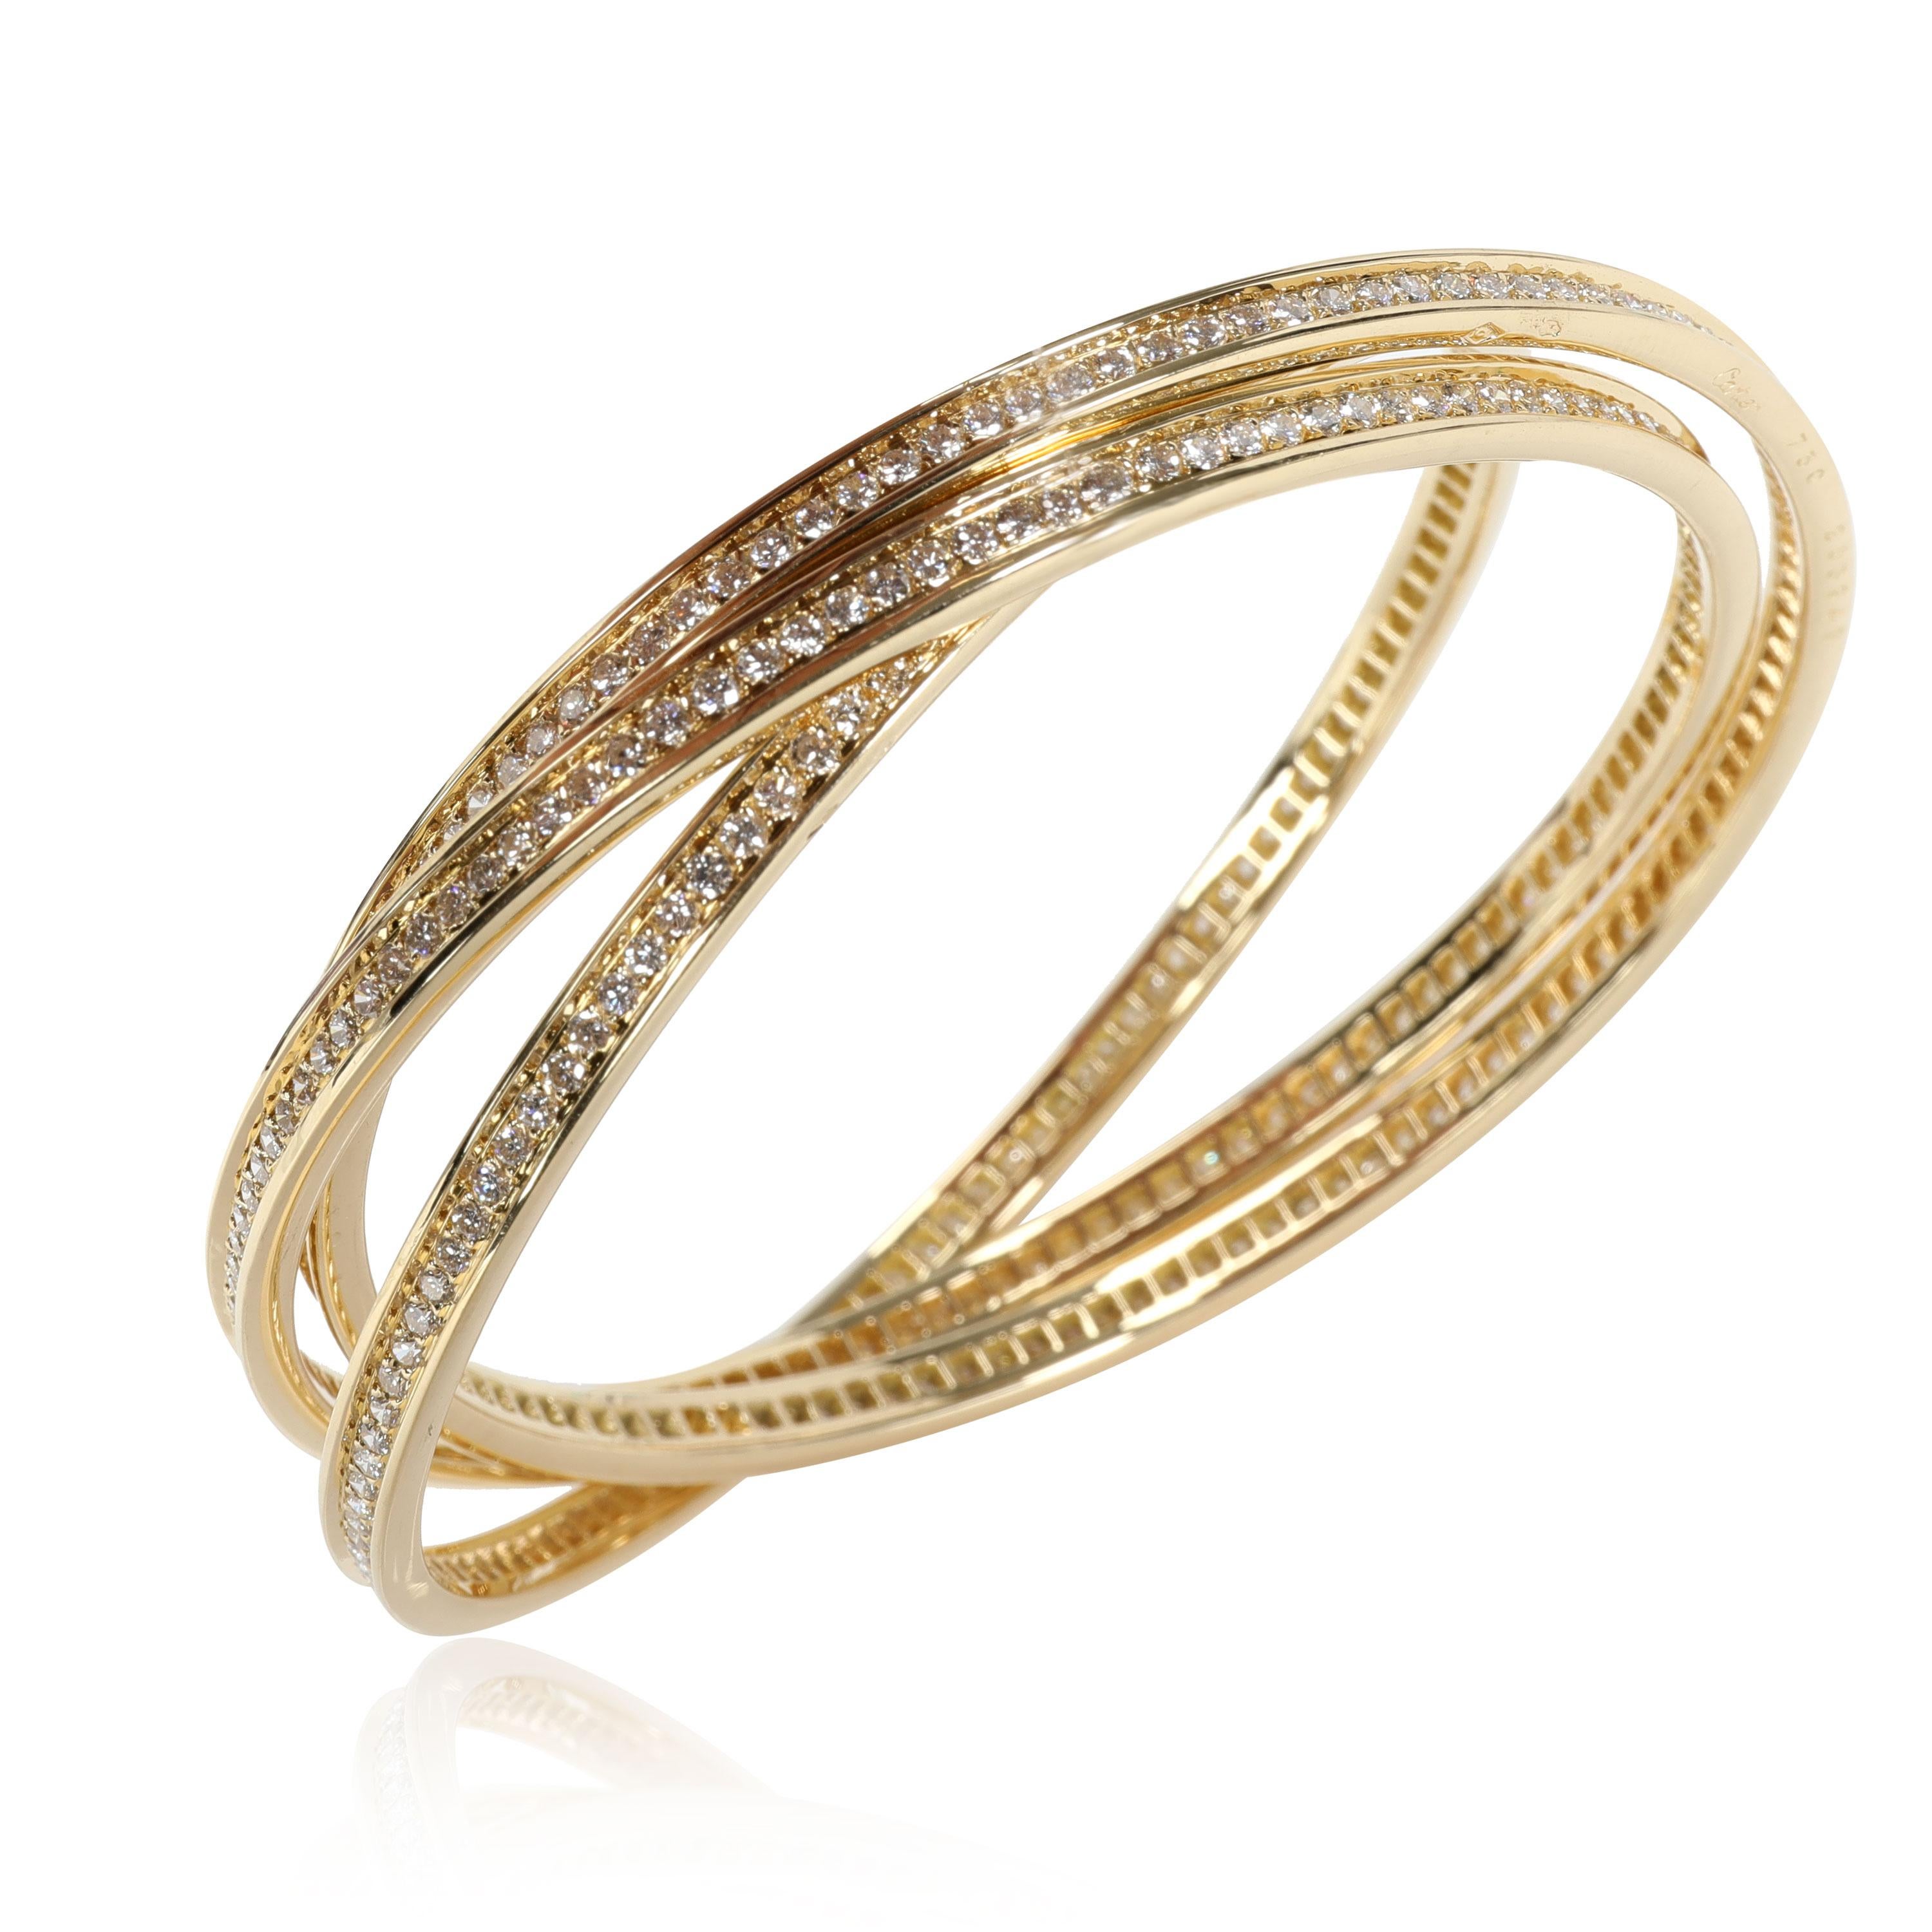 Cartier Trinity Diamond Bracelet in 18k Yellow Gold 8 CTW

PRIMARY DETAILS
SKU: 114886
Listing Title: Cartier Trinity Diamond Bracelet in 18k Yellow Gold 8 CTW
Condition Description: Retails for 57500 USD. In excellent condition and recently